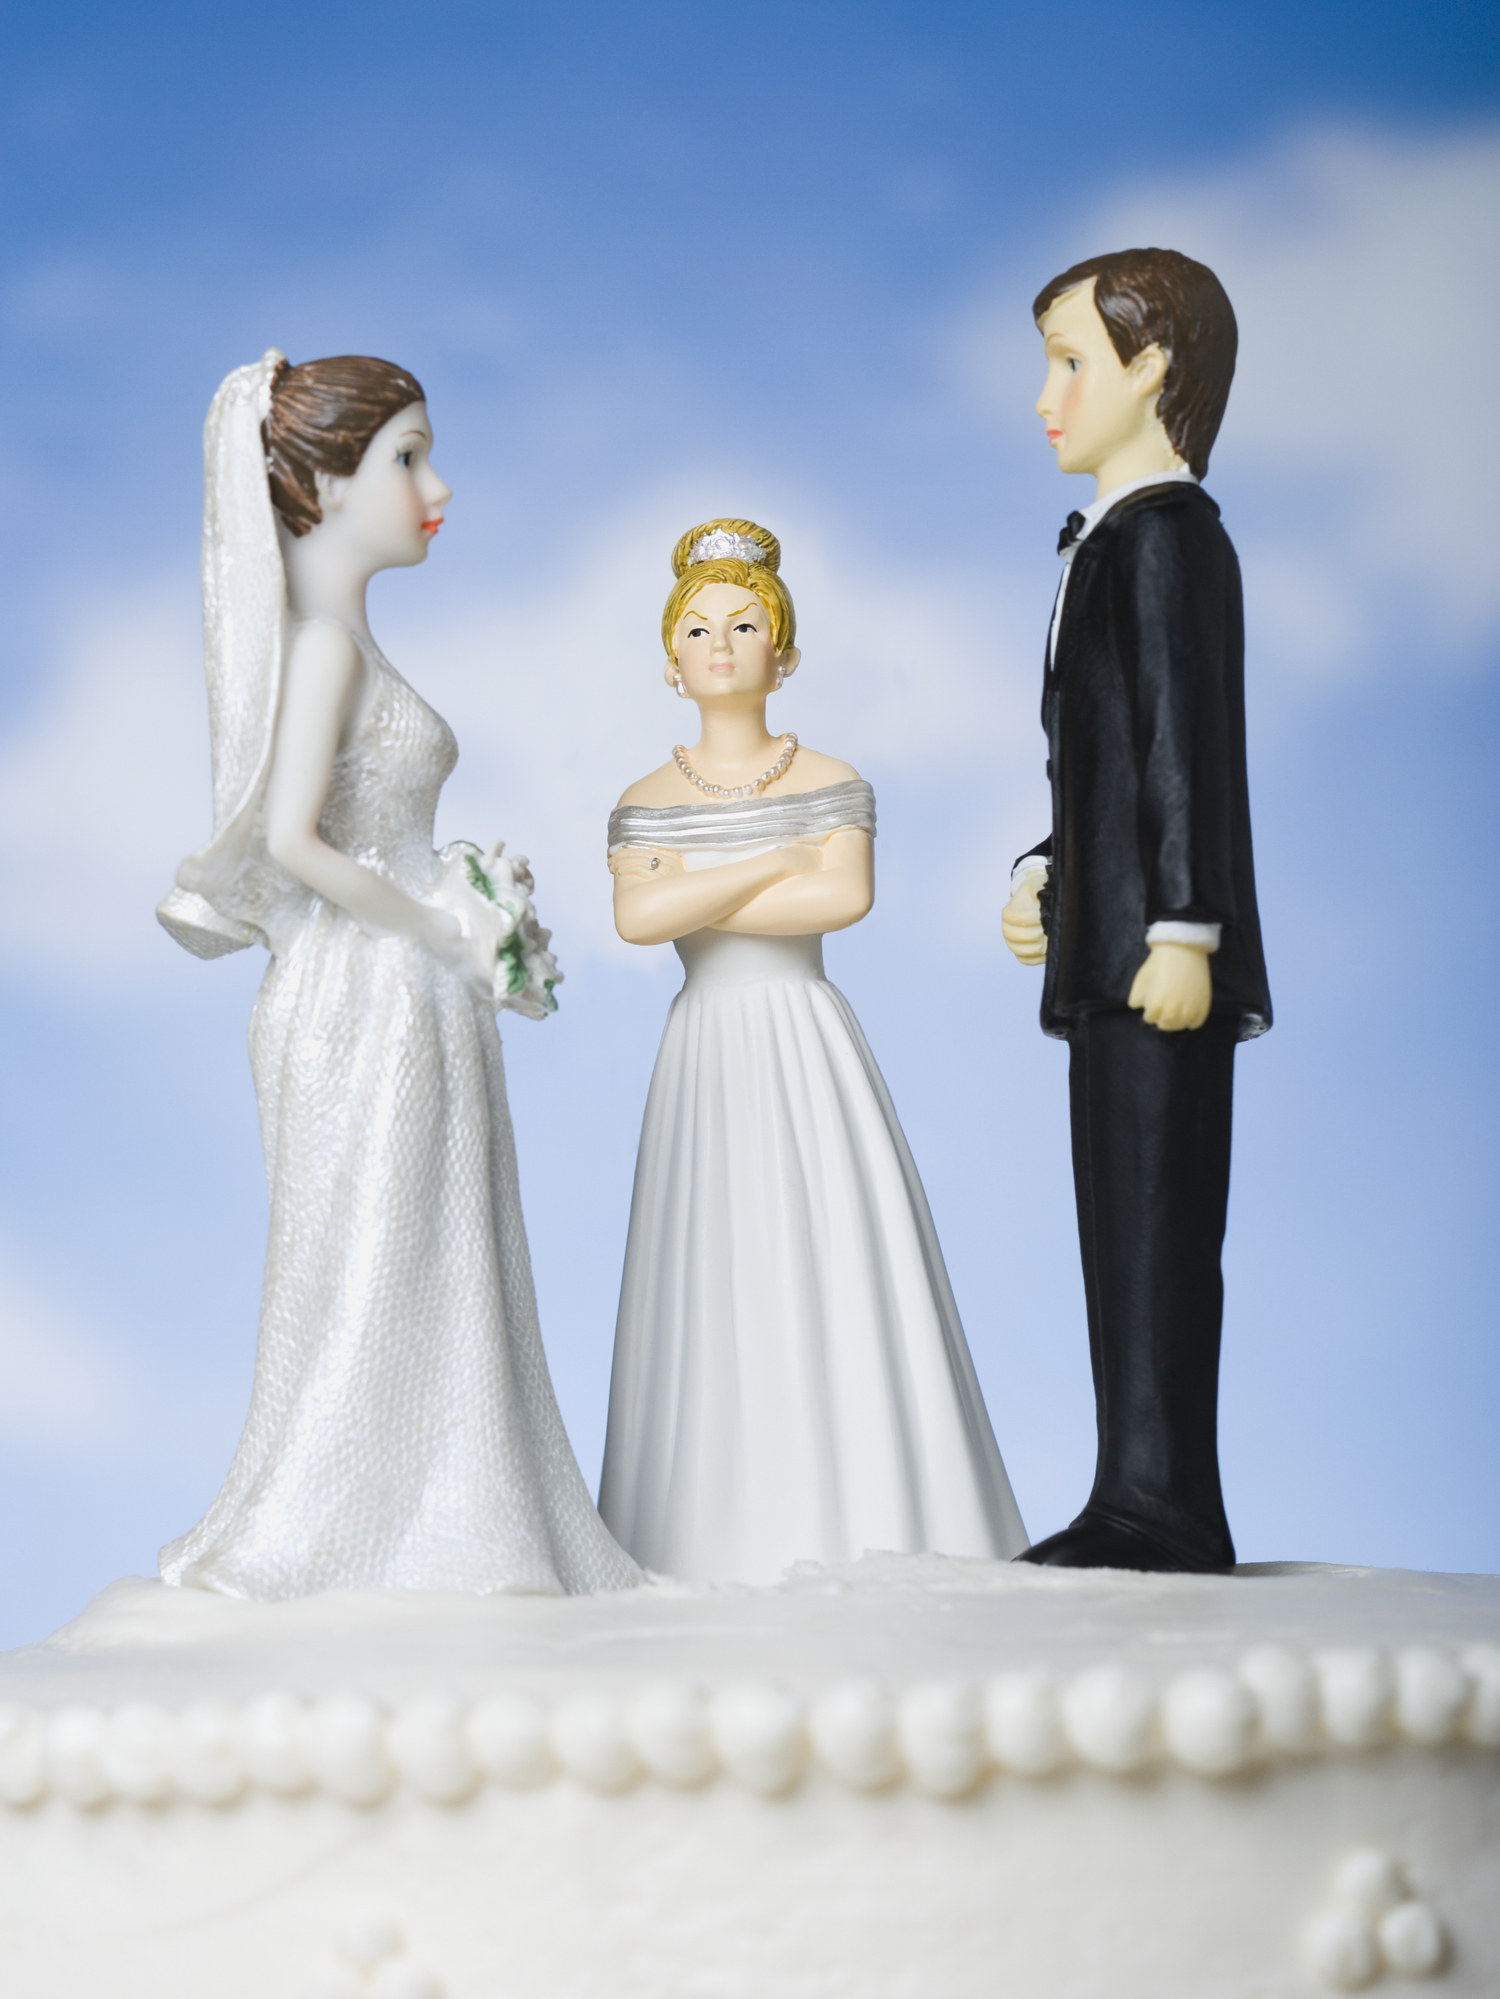 Figurines on top of a wedding cake